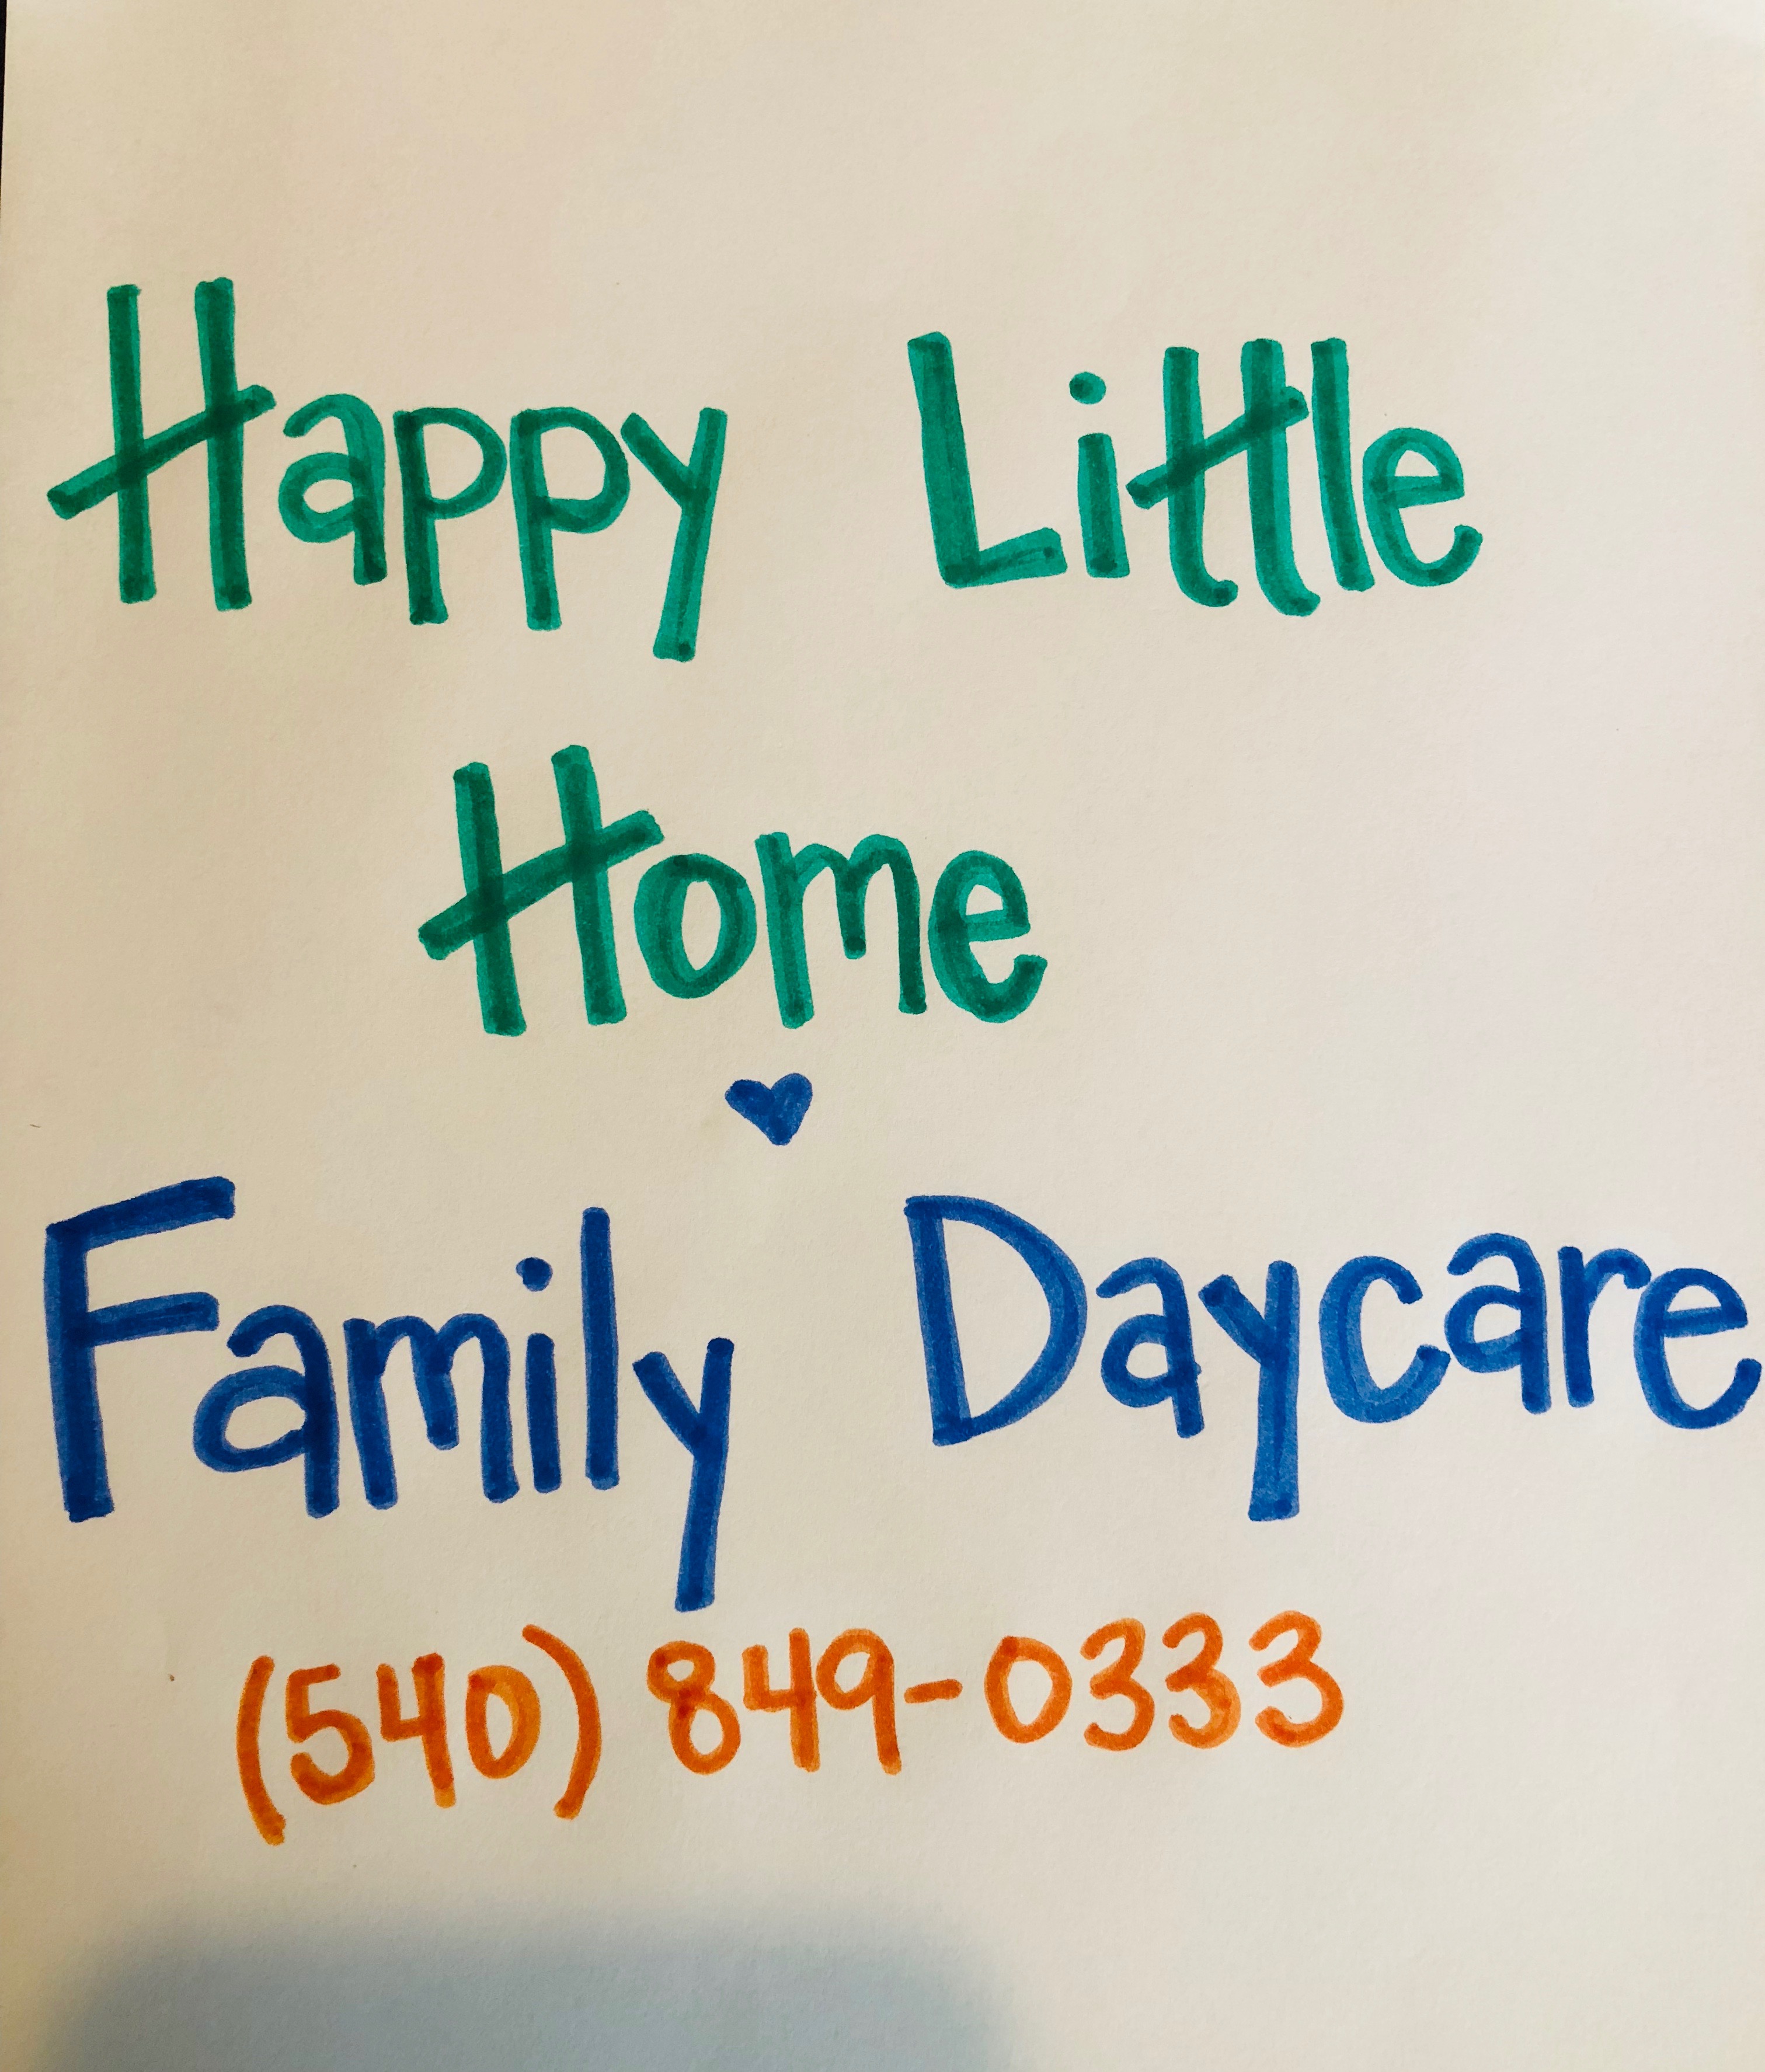 Happy Little Home Family Daycare Logo